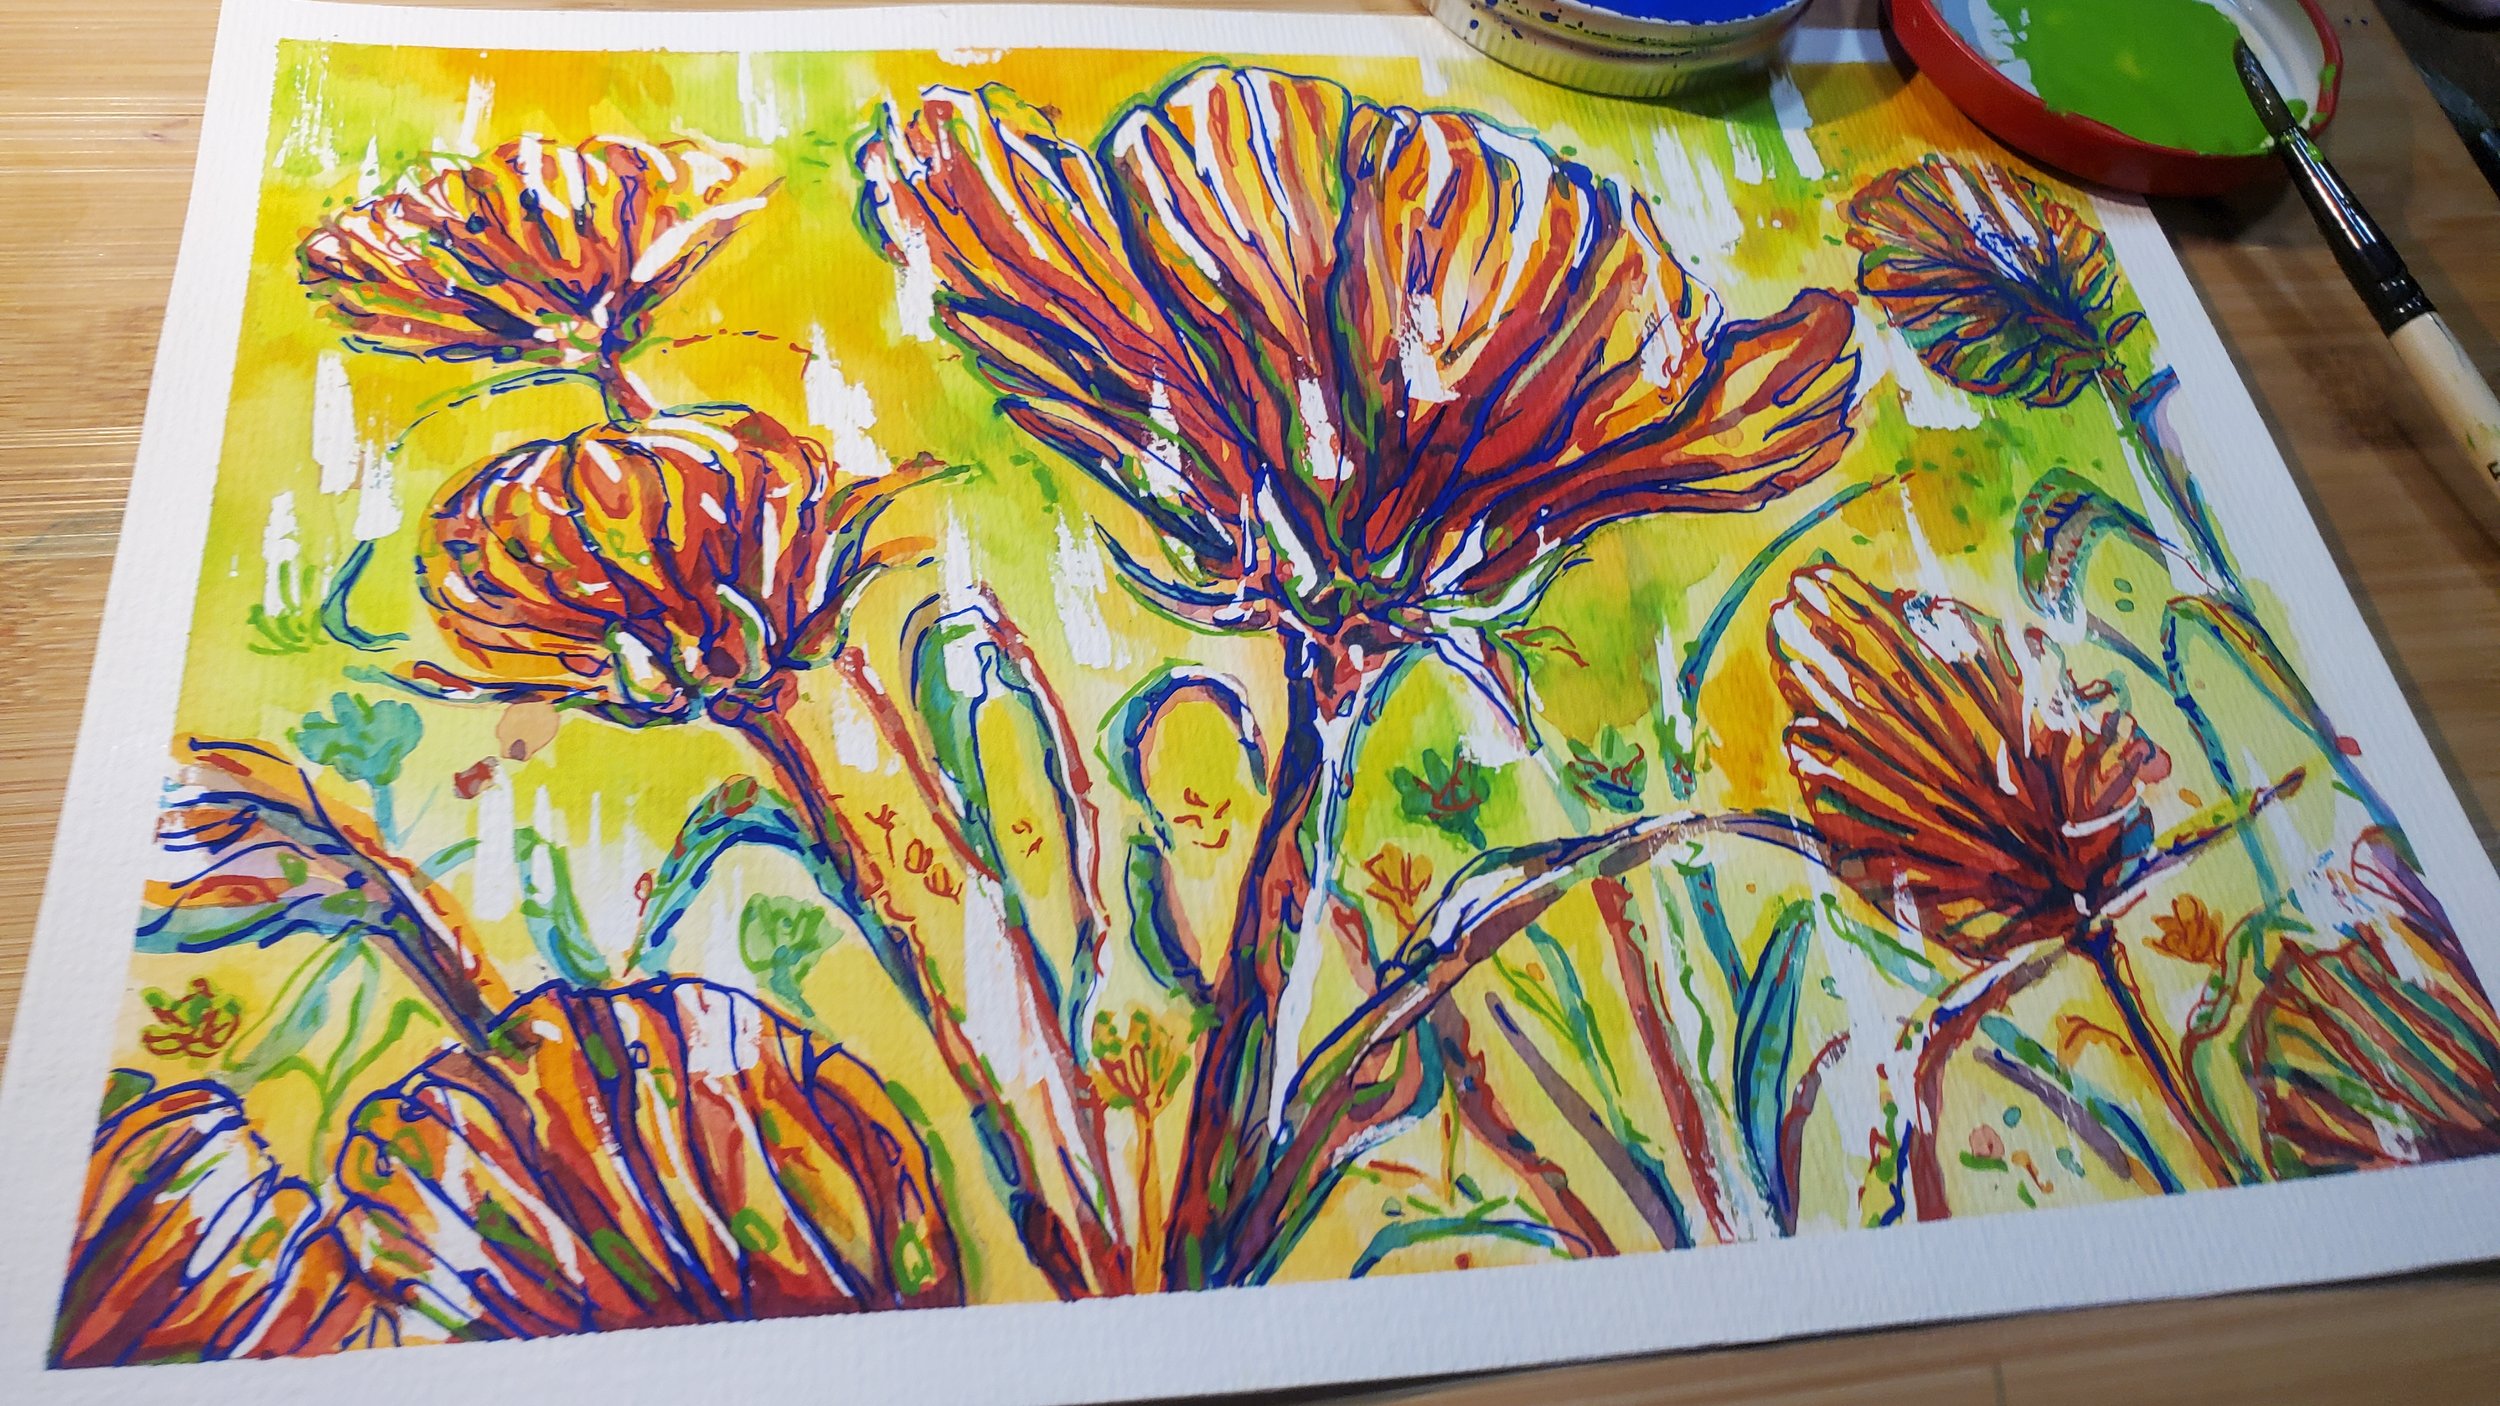   An image of Tiana Robinson’s painting, on paper. Vibrantly coloured flowers in red, orange, blue and yellow spring up against a yellow and green background.  